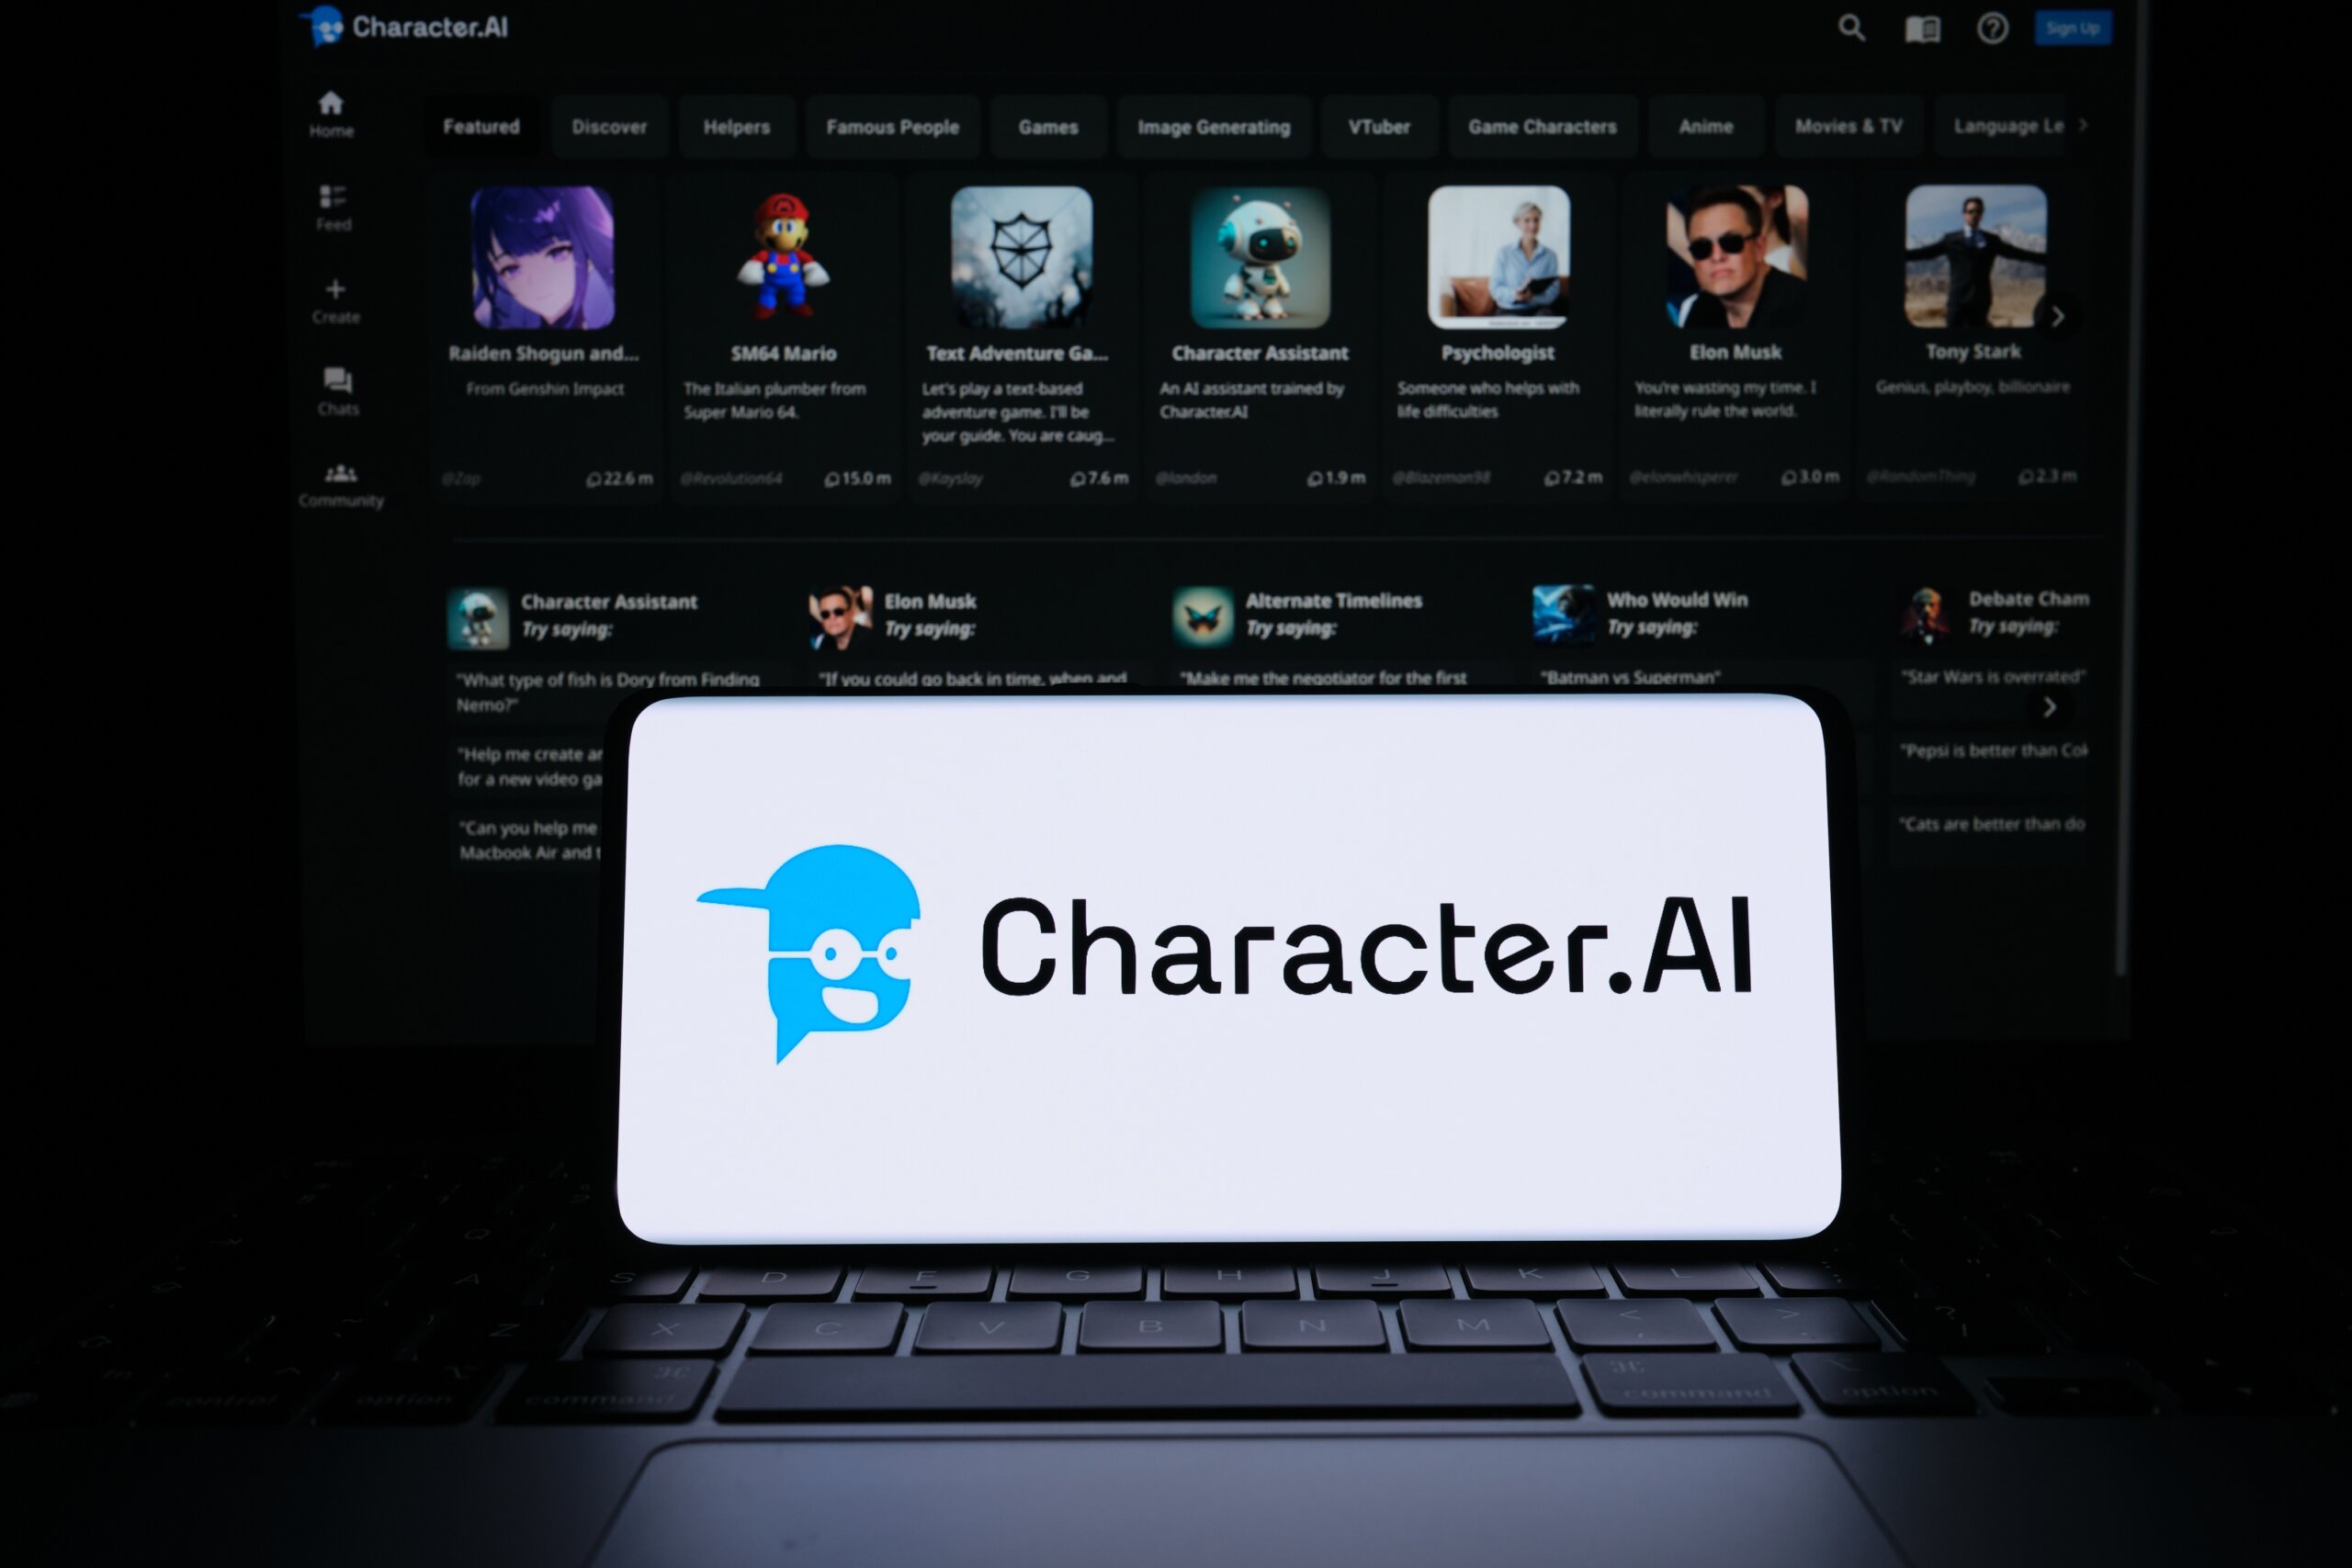 character.ai (@characterai) • Instagram photos and videos